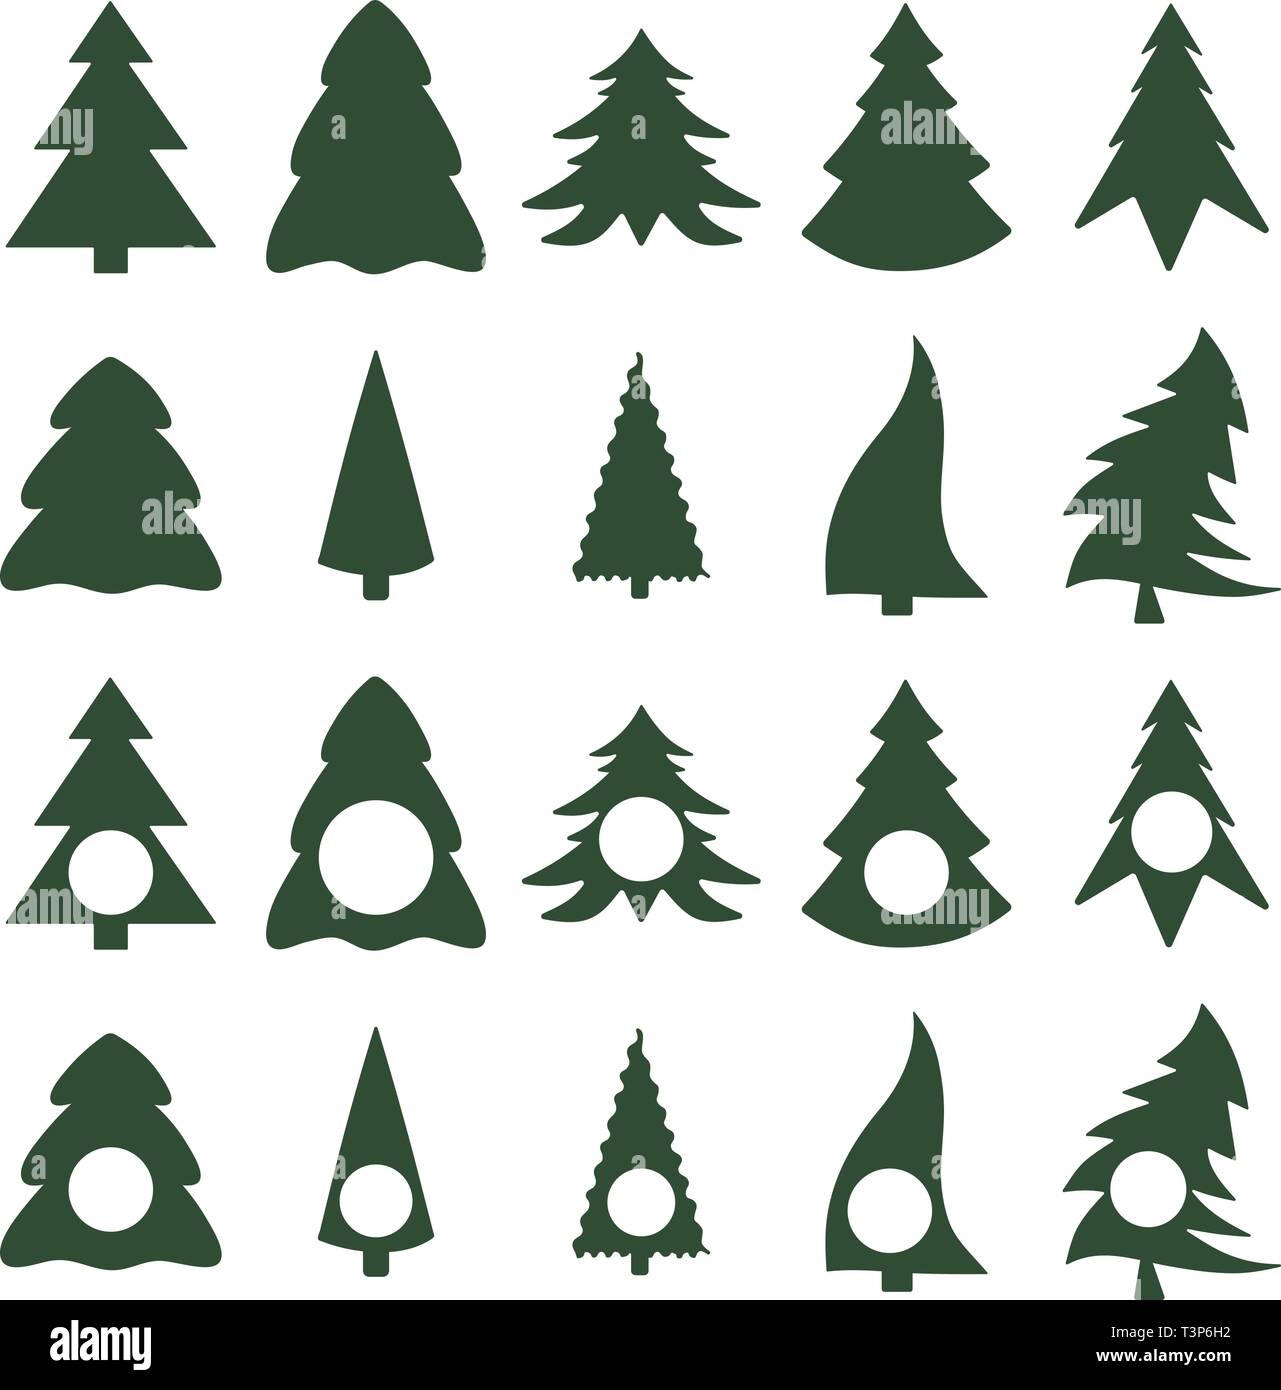 Christmas Tree Silhouettes with Monogram Stock Vector